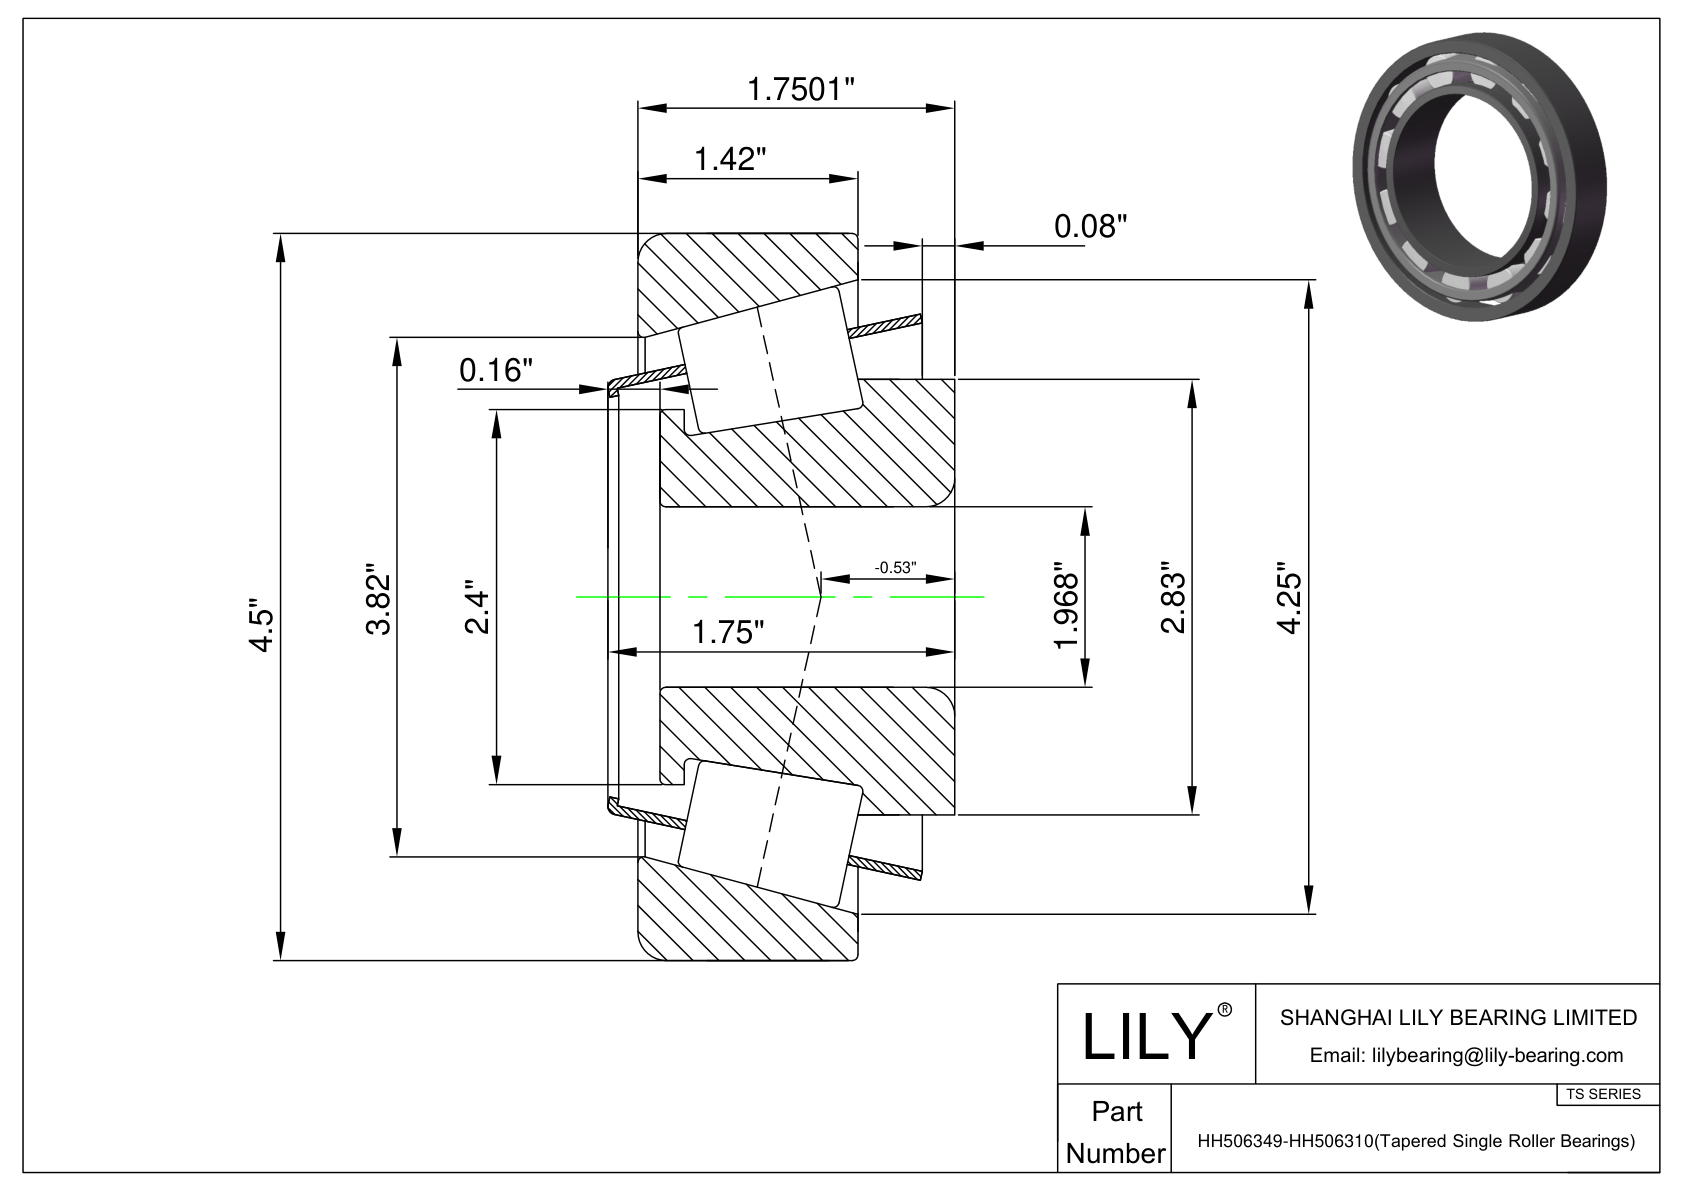 HH506349-HH506310 TS (Tapered Single Roller Bearings) (Imperial) cad drawing